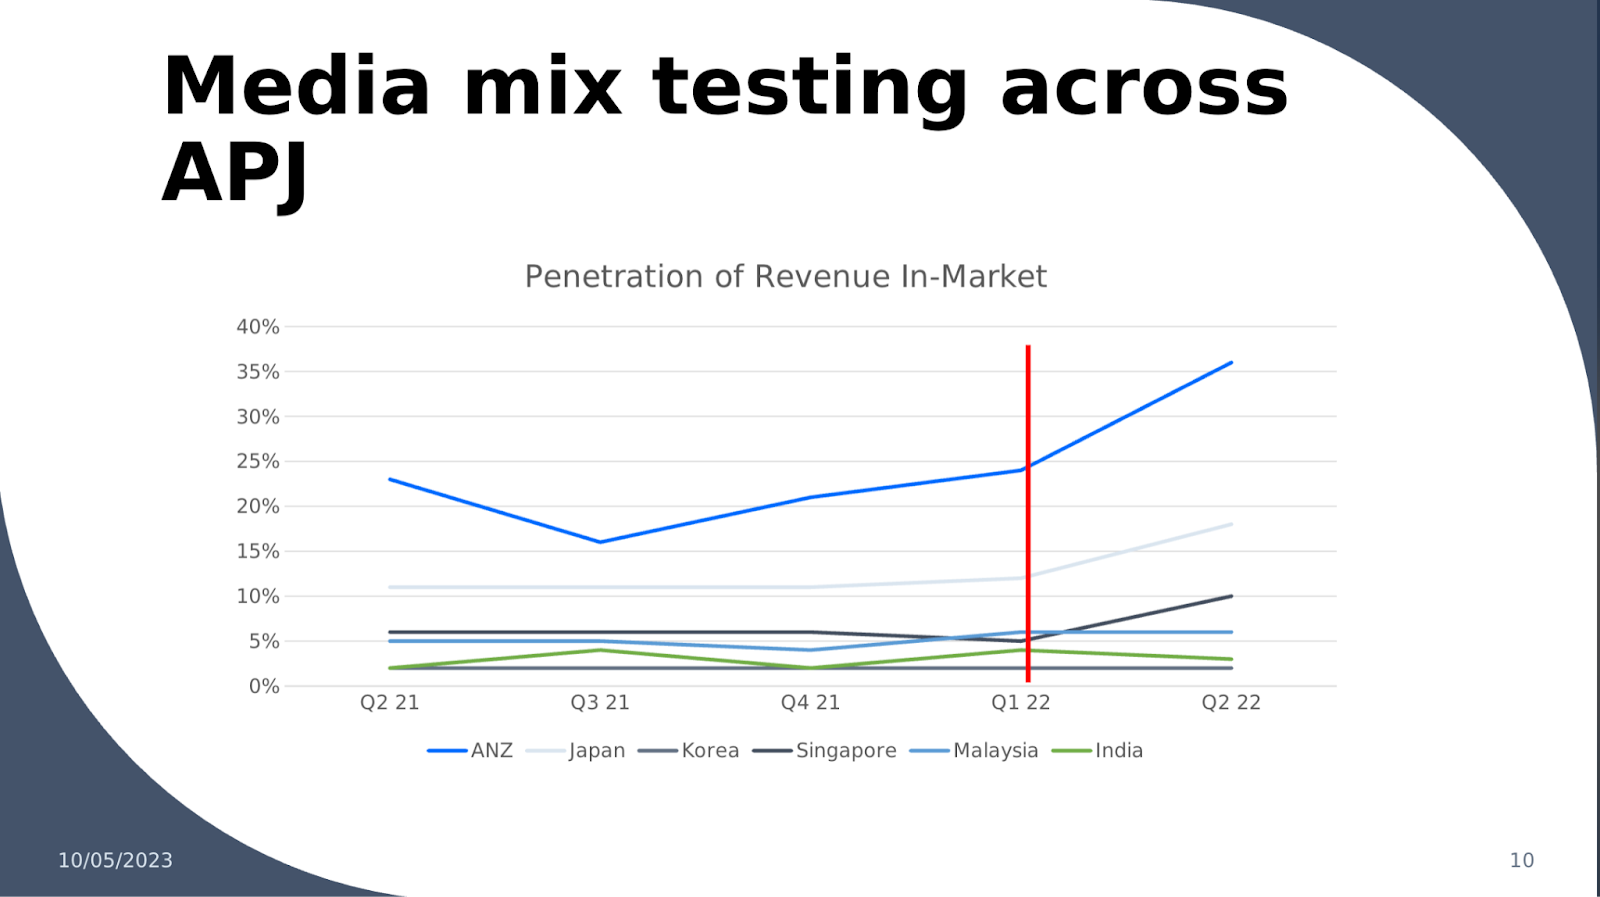 Media mix testing across APJ - a table that is the penetration of revenue in-market across ANZ, Japan, Korea, Singapore, Malaysia and India. ANZ is significantly higher and reaches a steep incline from Q1 of 2022. 